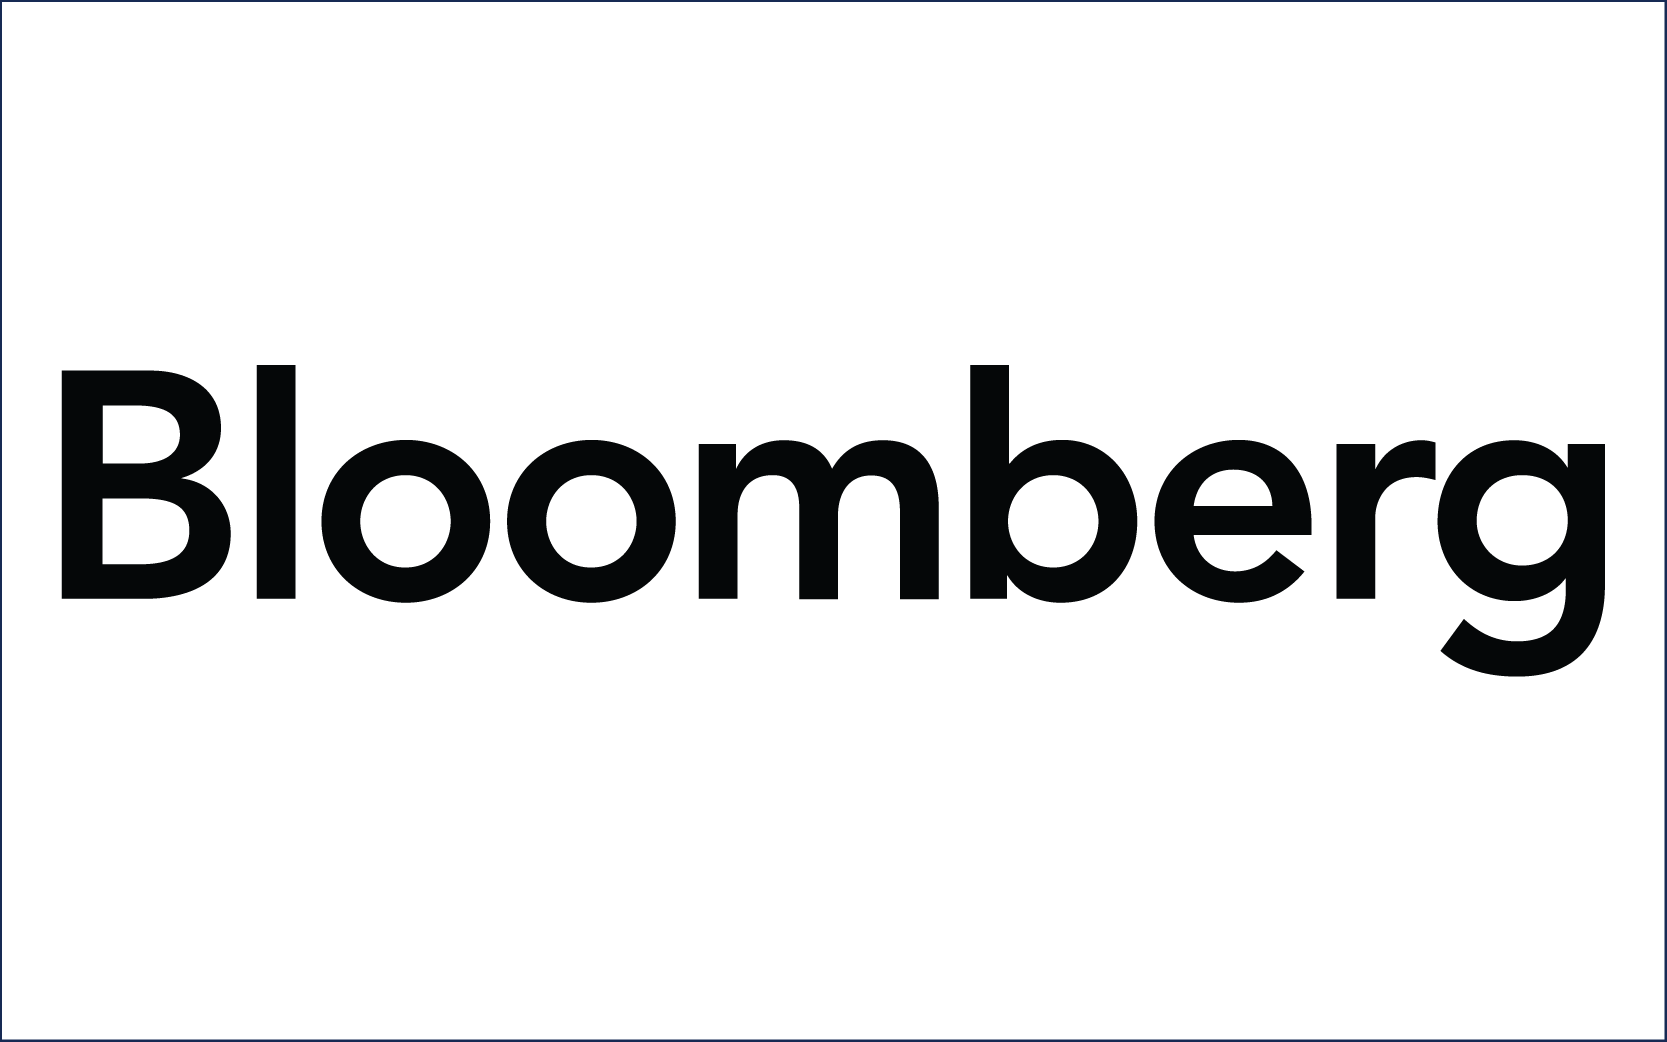 Ranked #1 in the Bloomberg India equity offerings league tables 2022 by number of transactions